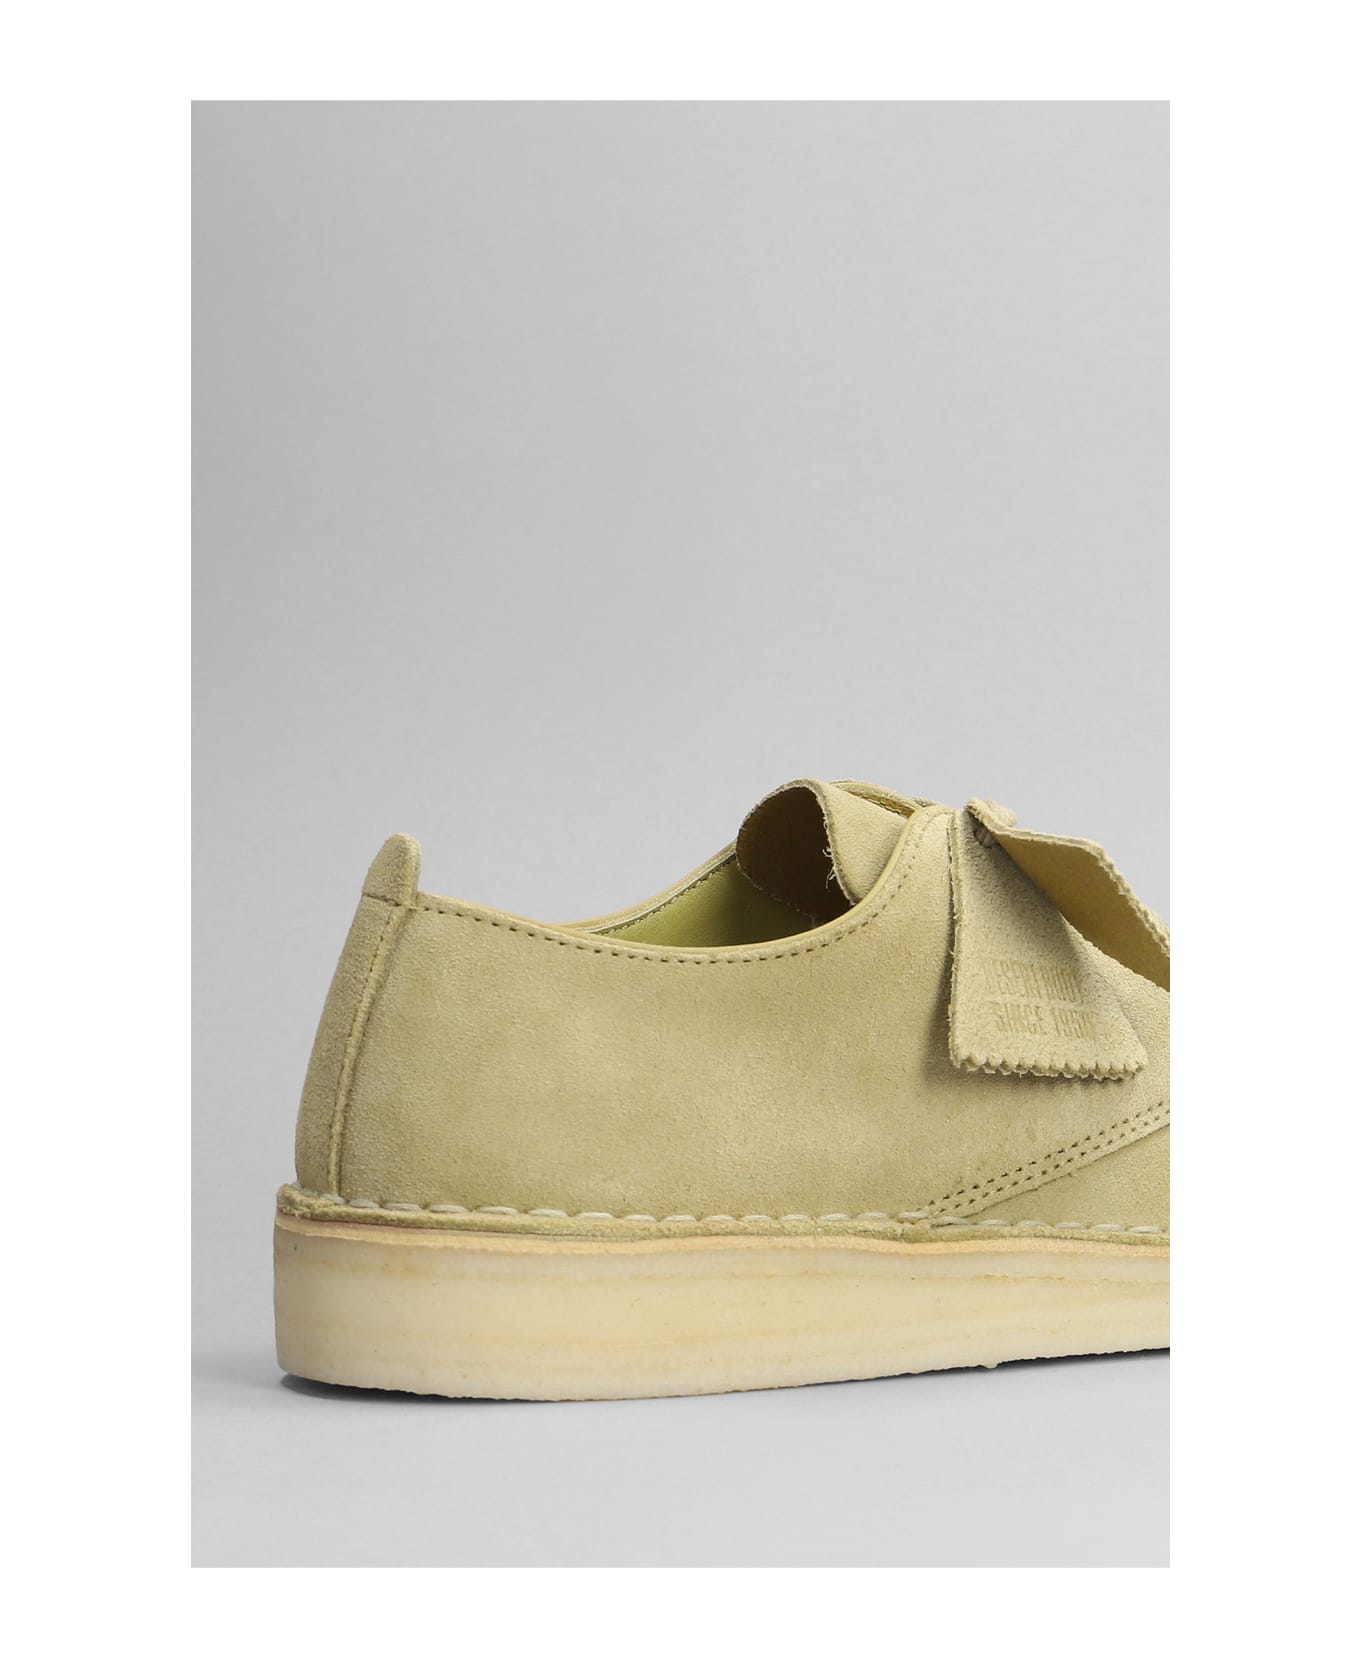 Clarks Coal London Lace Up Shoes In Khaki Suede - khaki ローファー＆デッキシューズ